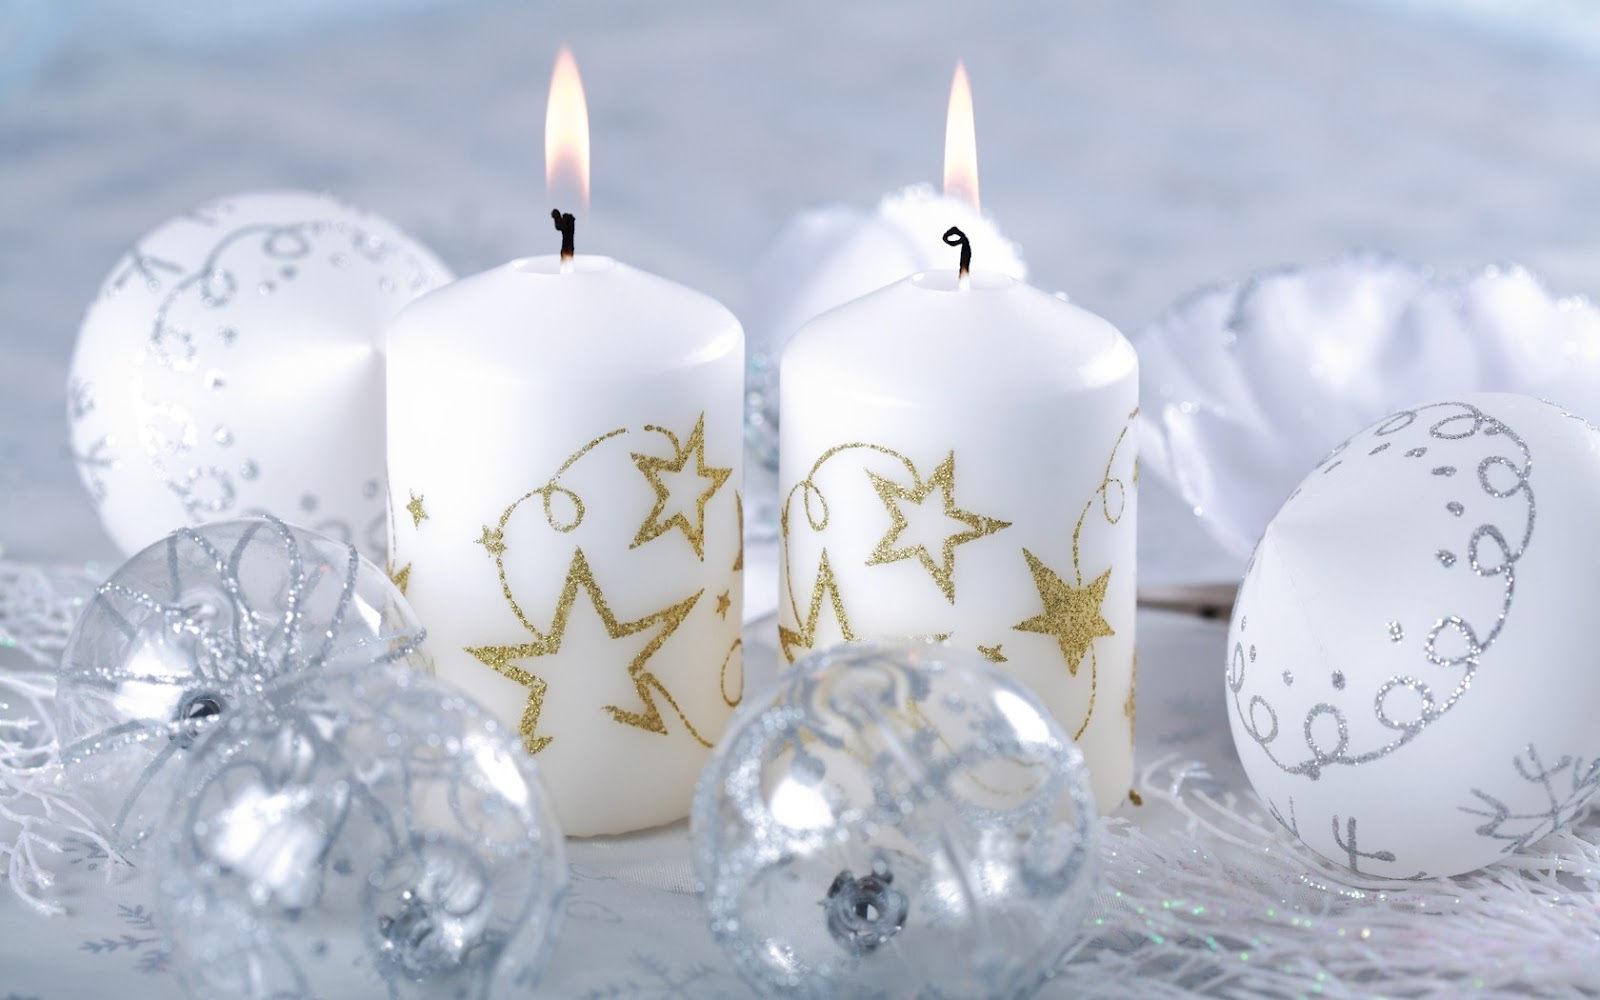 229600 White Candle Stock Photos Pictures  RoyaltyFree Images  iStock   Advent wreath white candle White candle isolated White candle from above